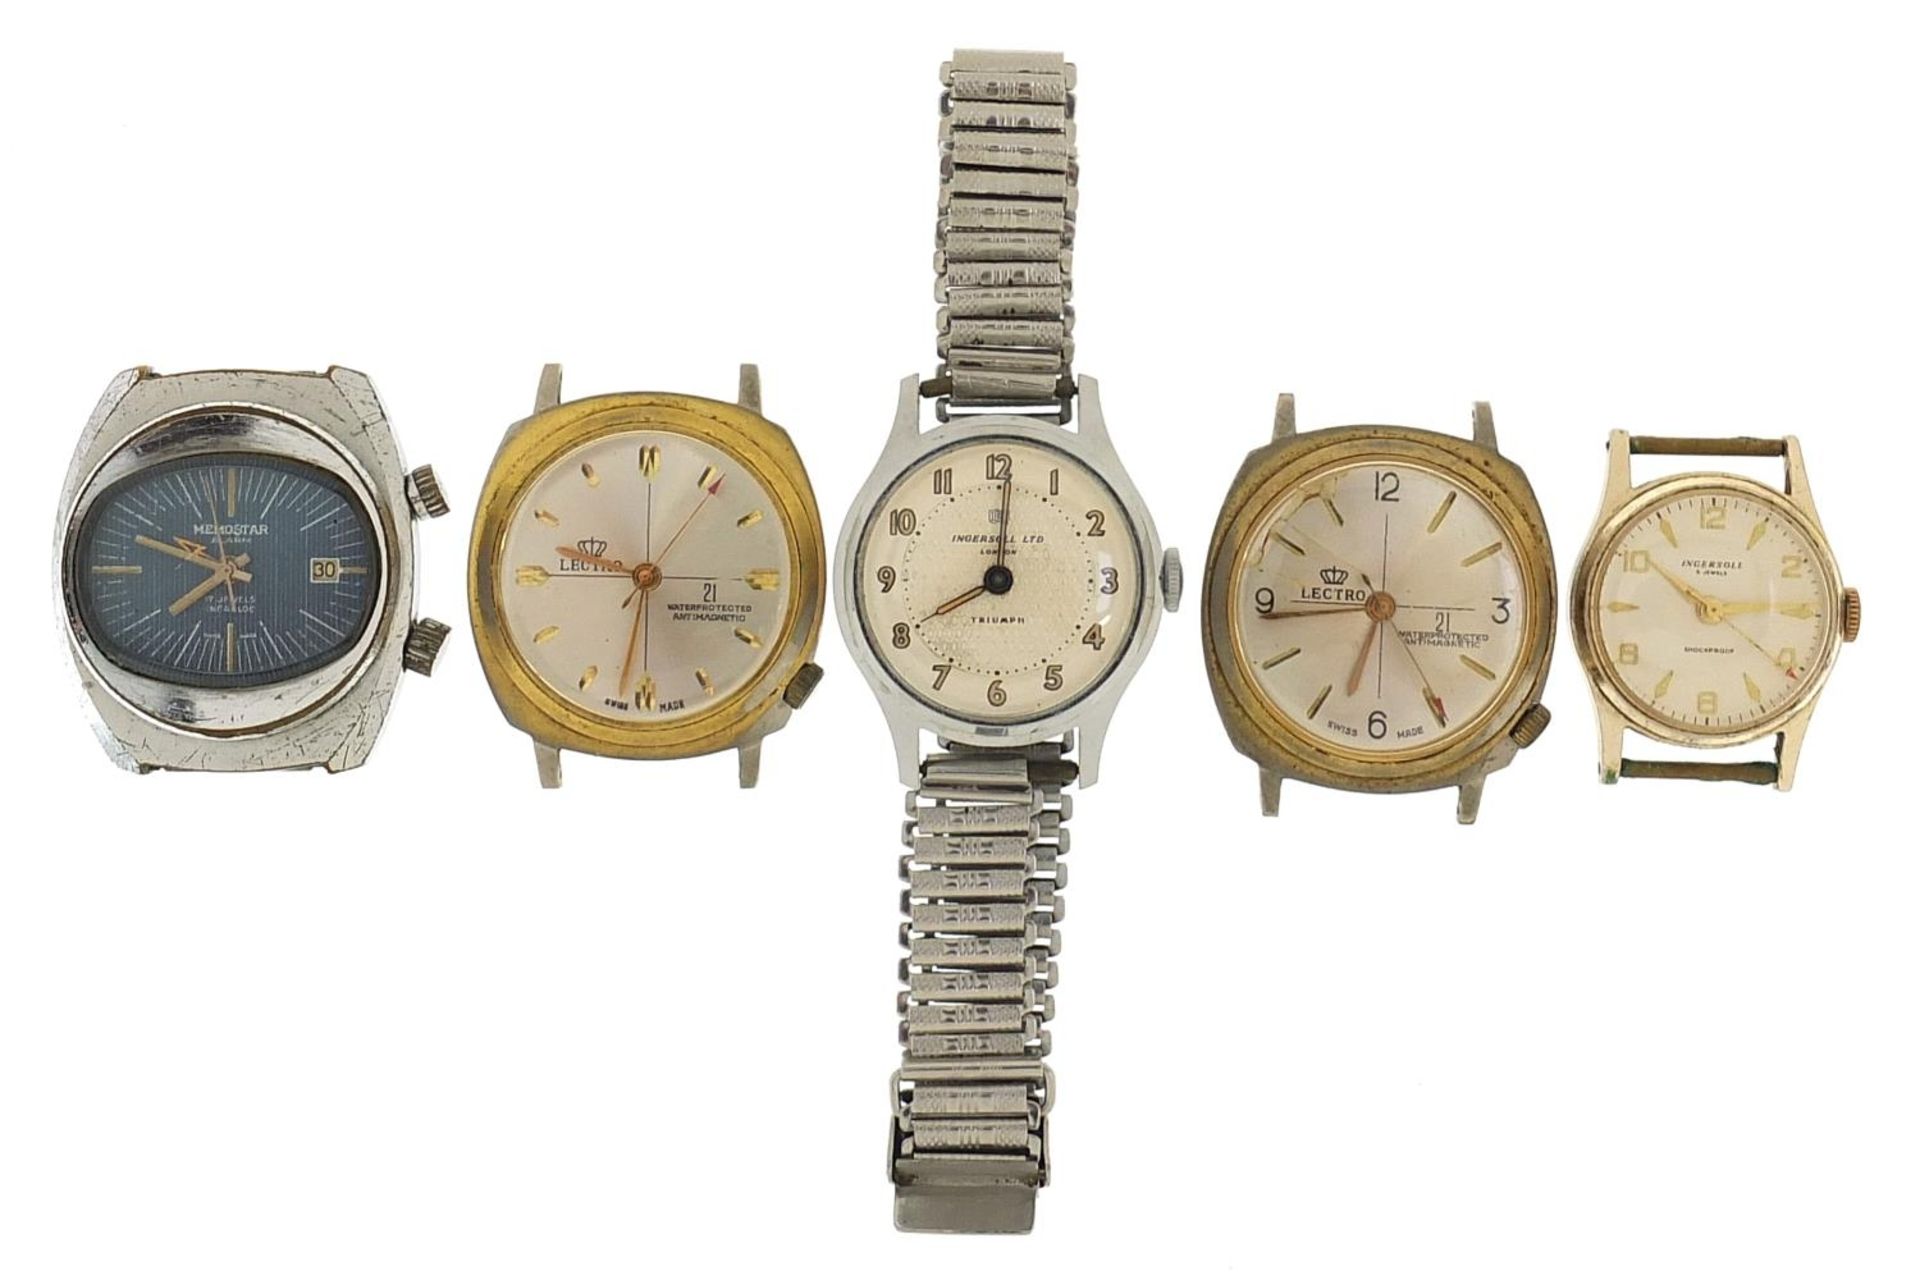 Five vintage wristwatches including Ingersoll Triumph, Memostar alarm, Lectro and Ingersoll - Image 4 of 5